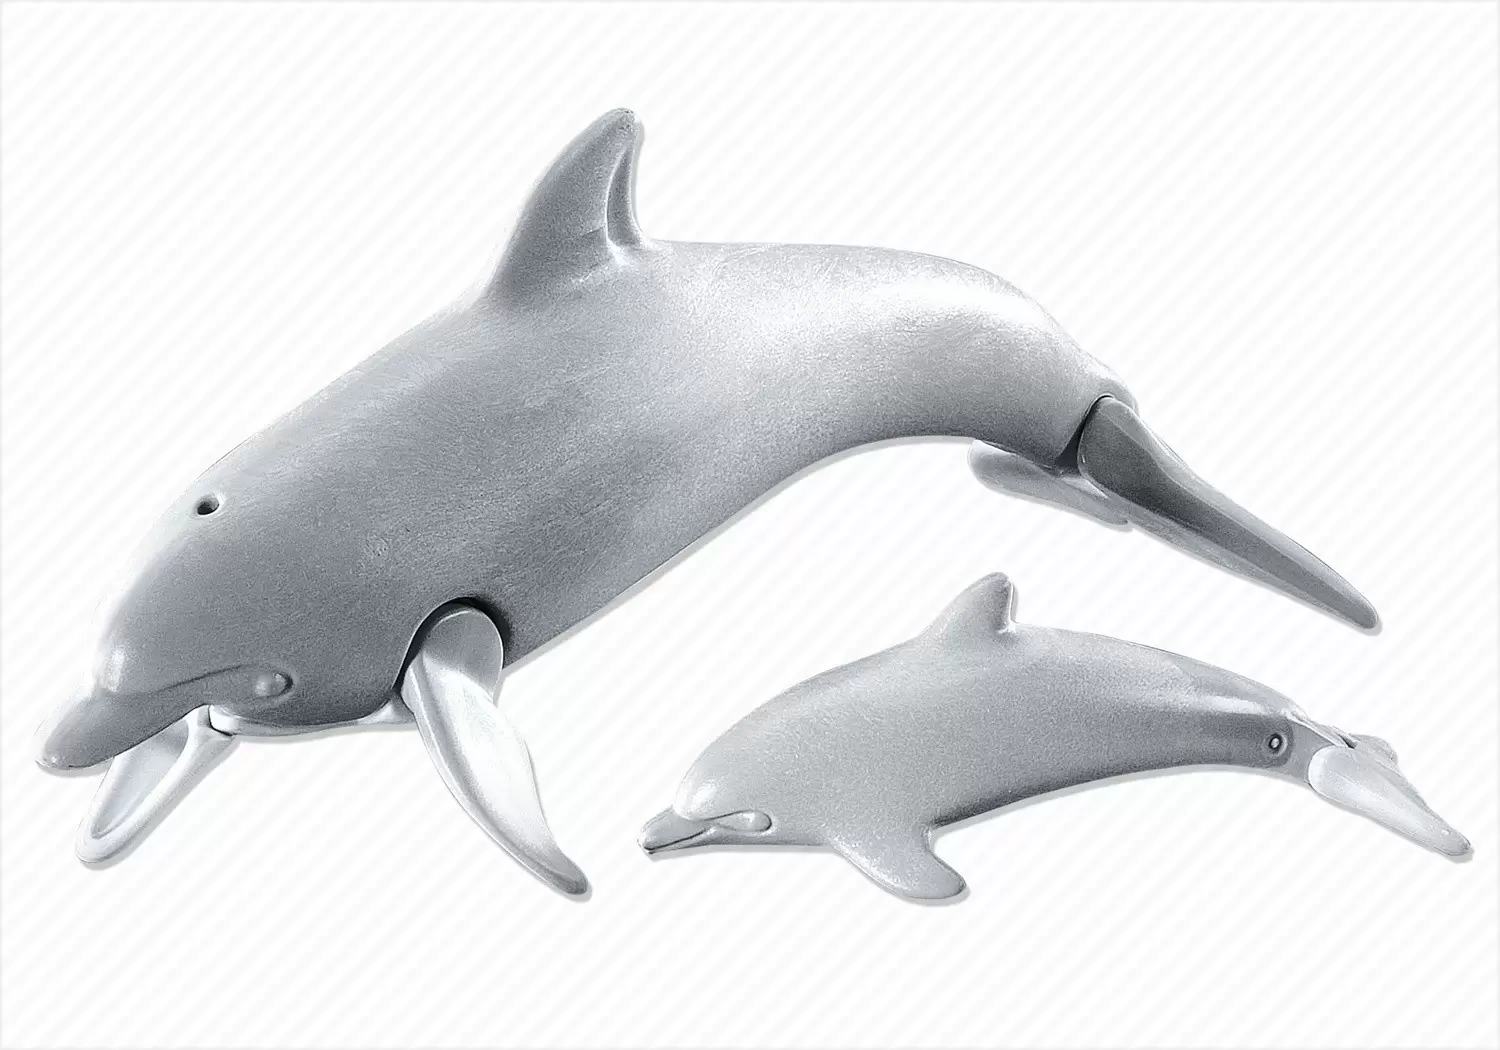 Plamobil Animal Sets - Dolphin with Calf